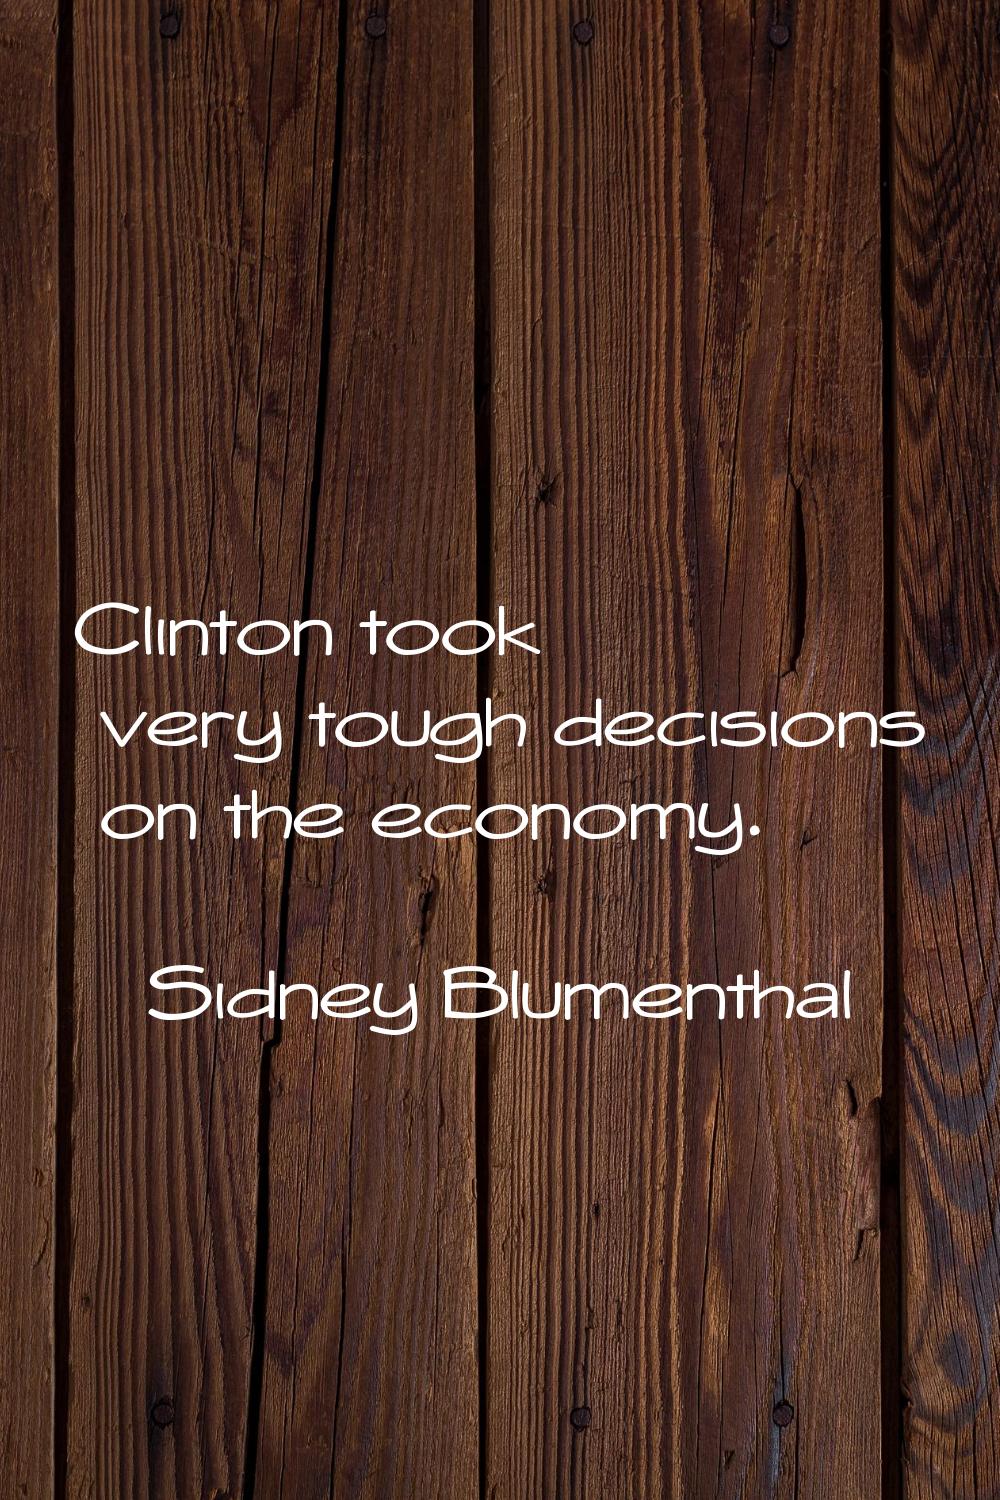 Clinton took very tough decisions on the economy.